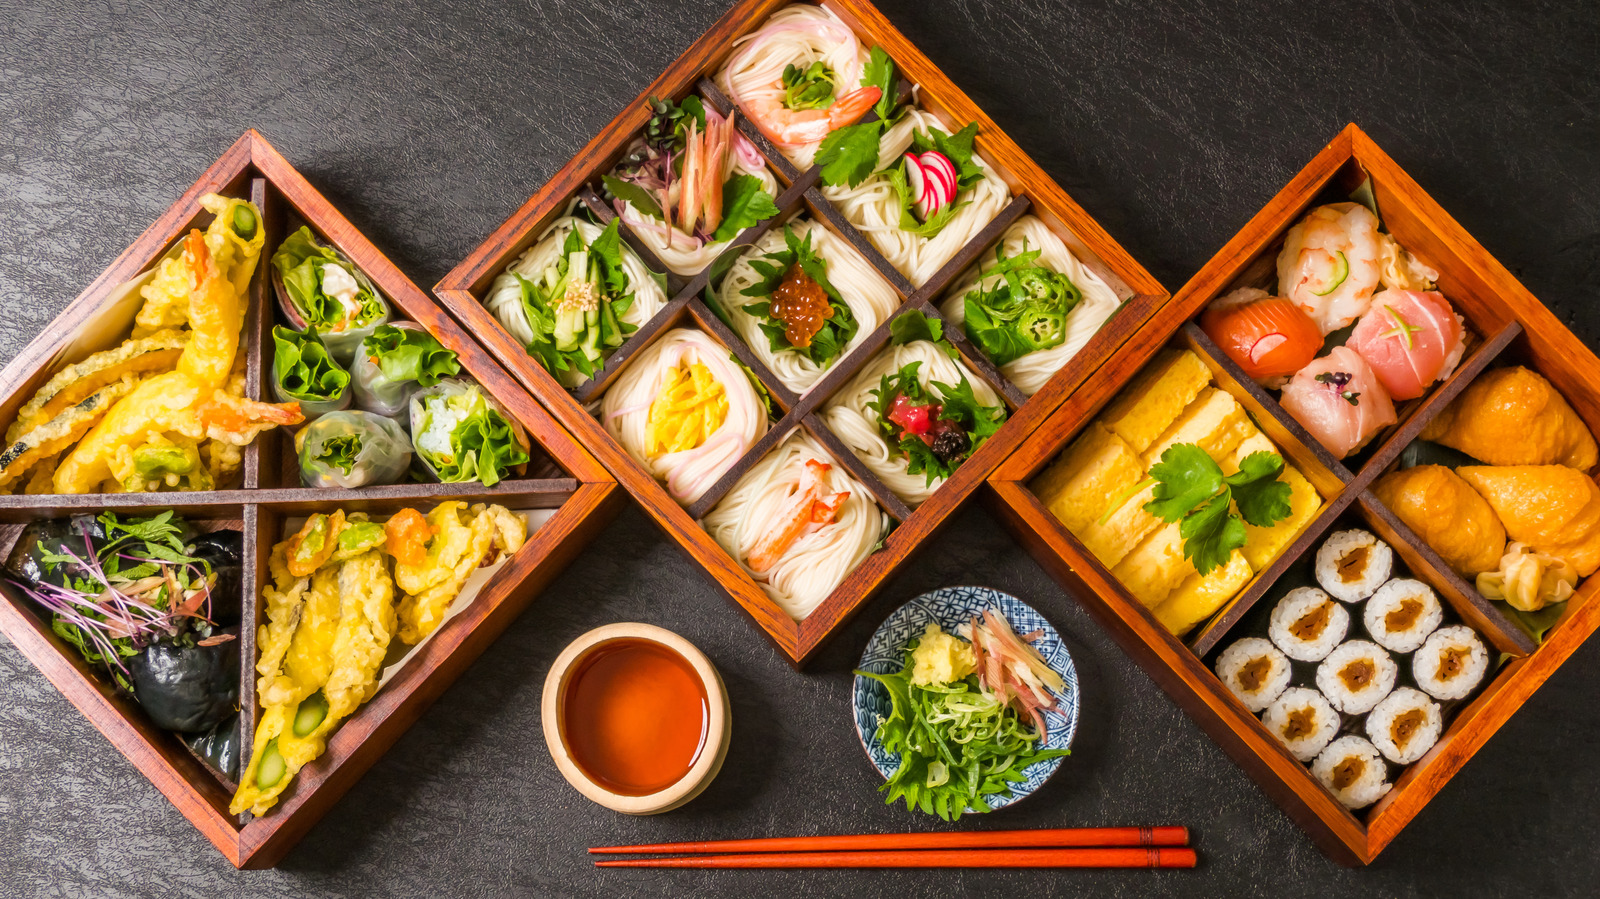 30 Japanese Dishes You Need To Try At Least Once